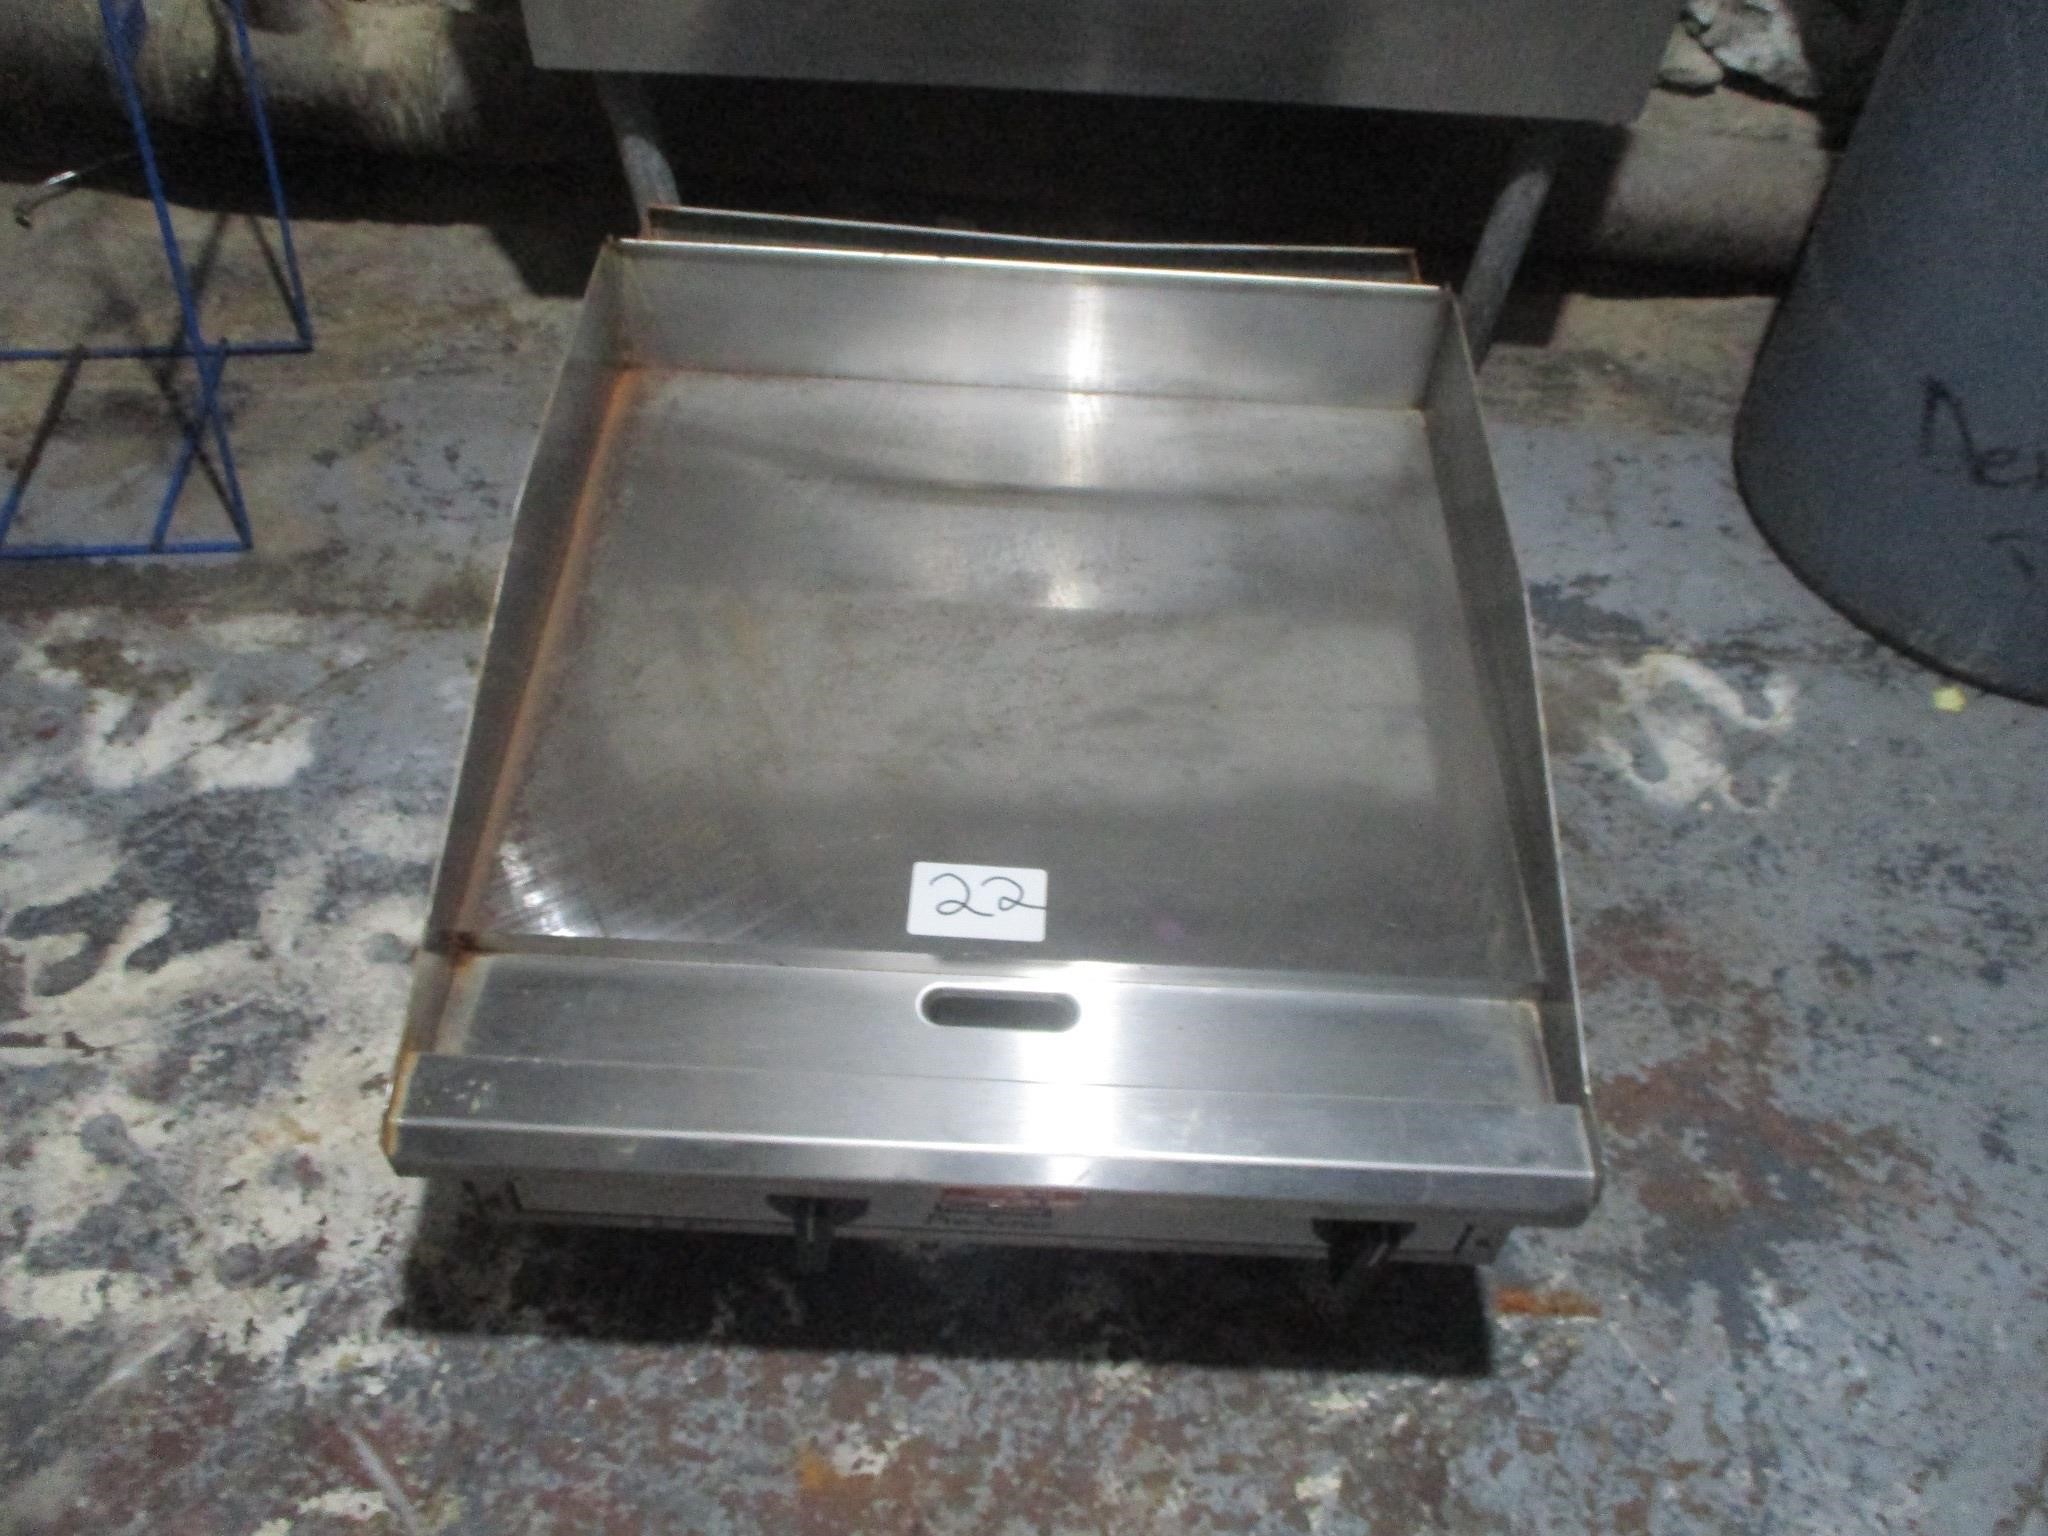 2' TOASTMASTER GAS FLAT GRILL